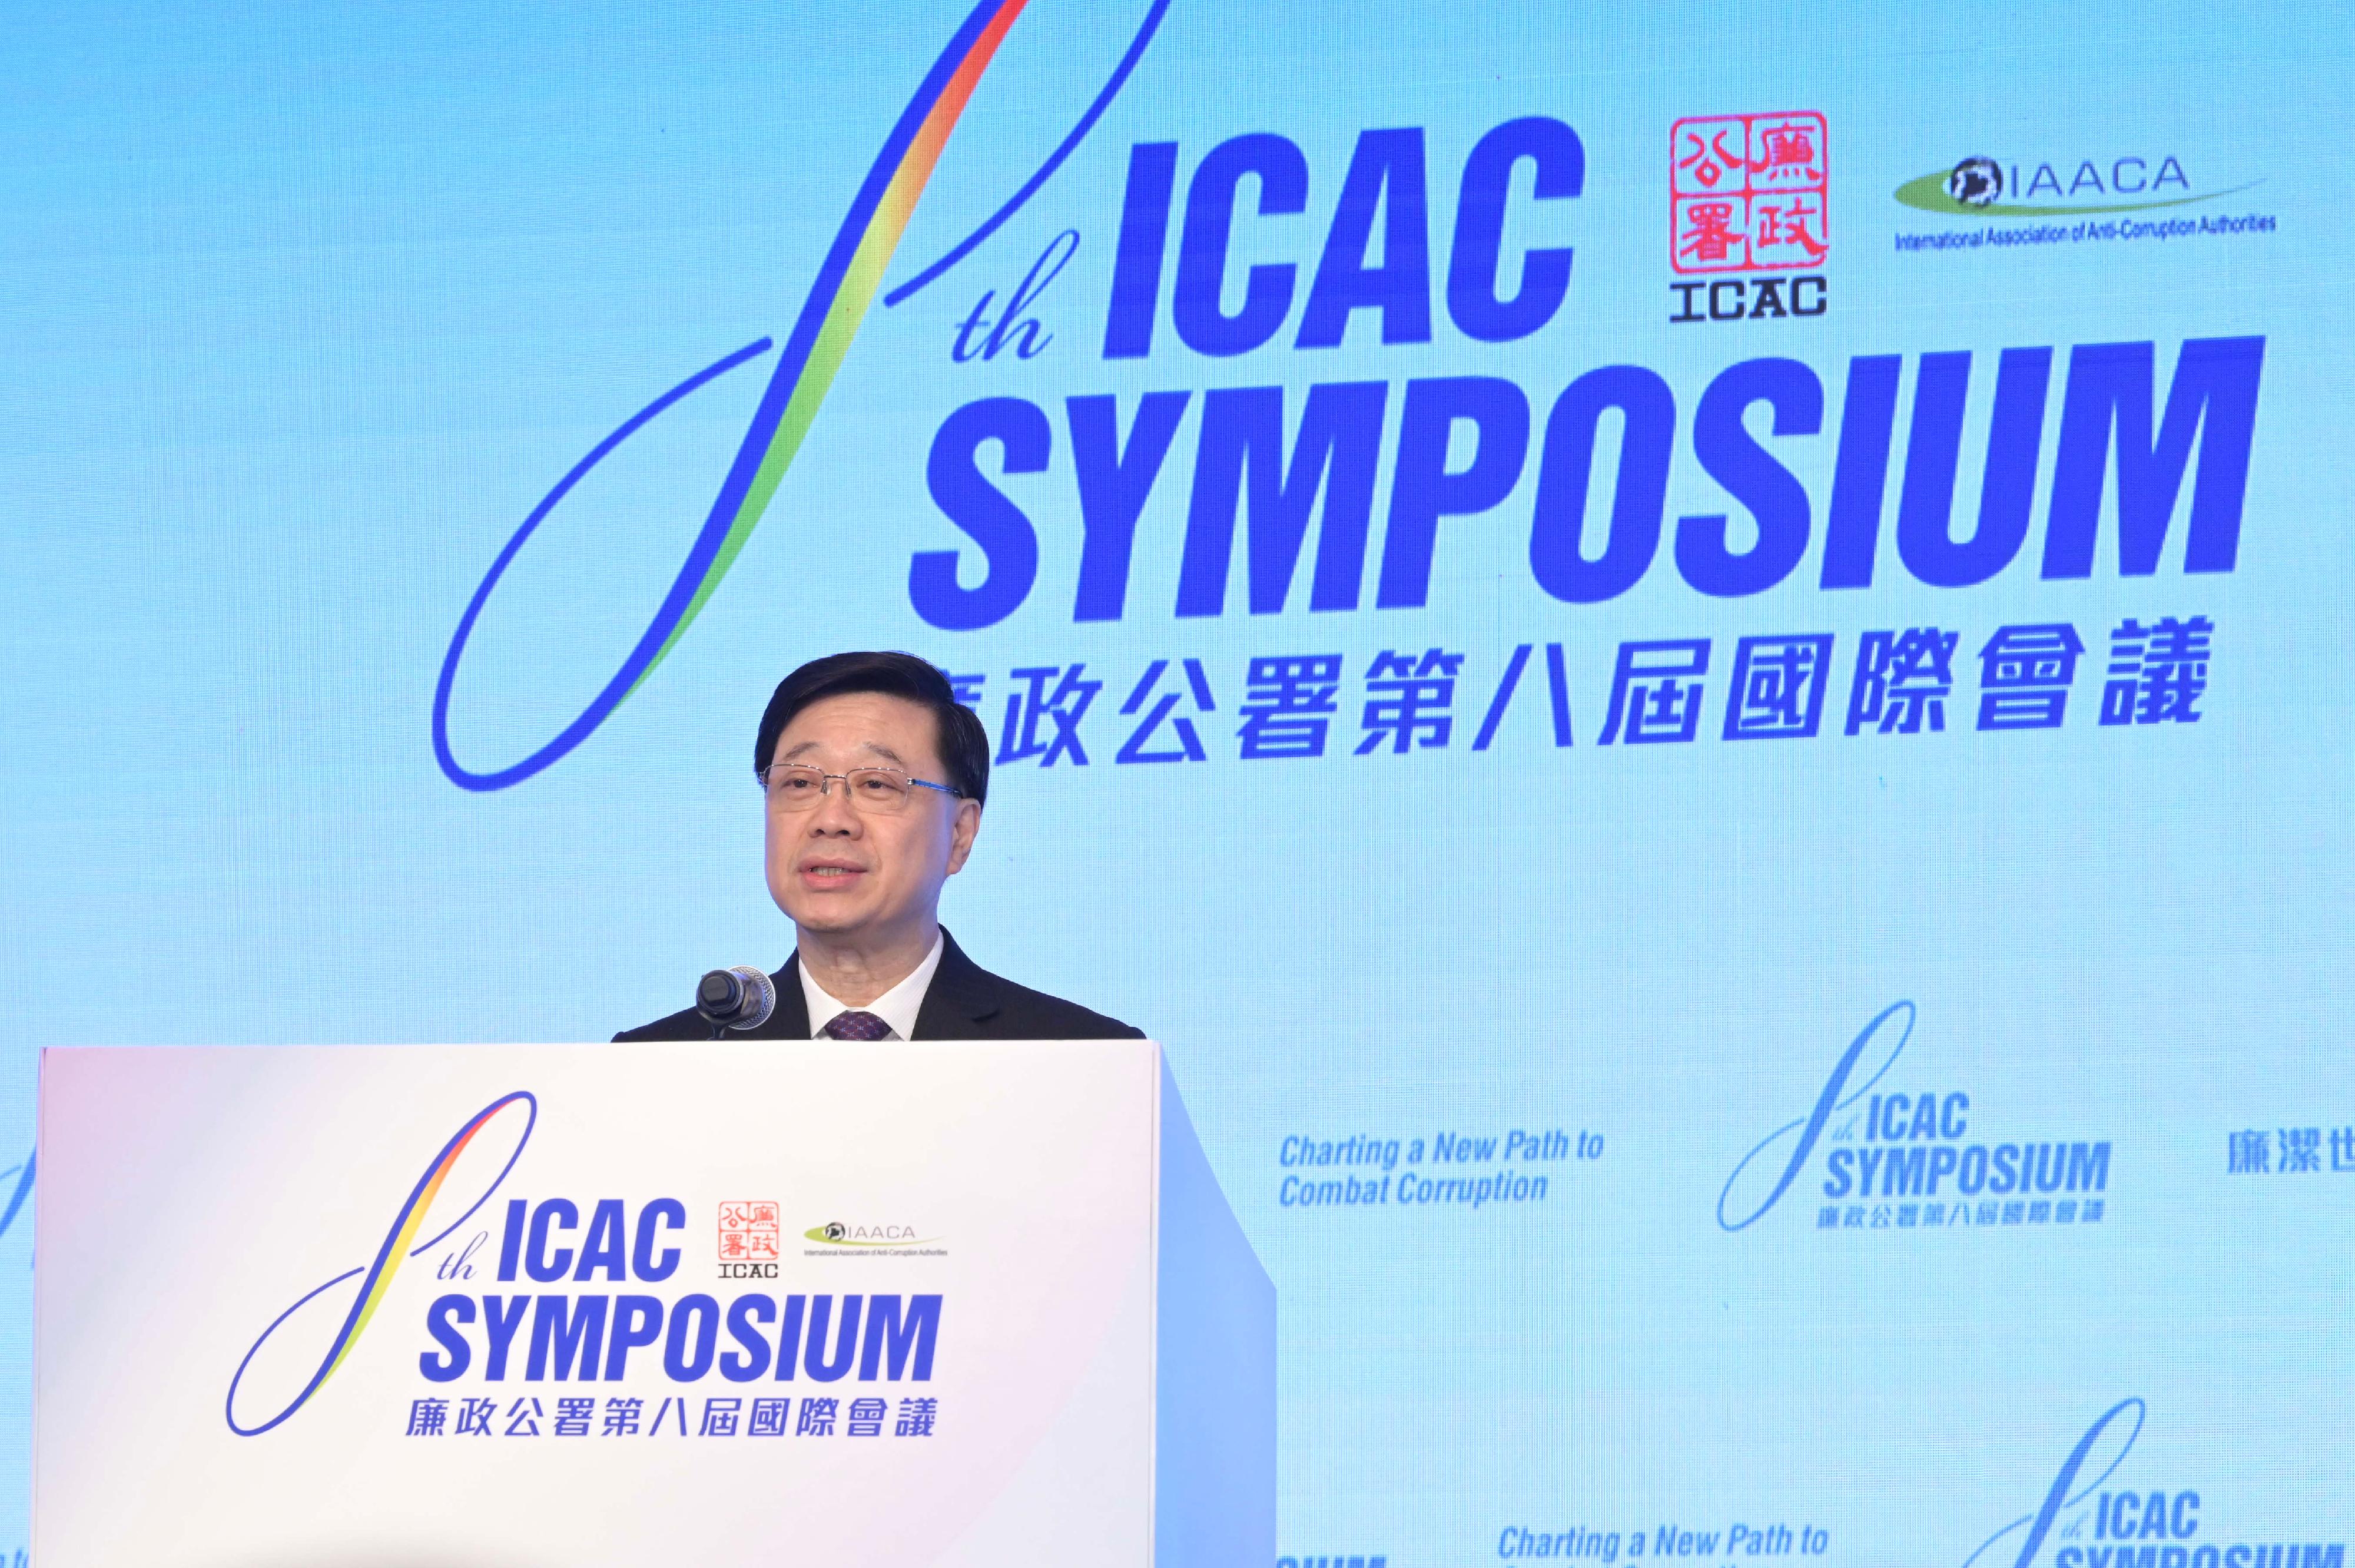 The Chief Executive, Mr John Lee, speaks at the 8th ICAC (Independent Commission Against Corruption) Symposium today (May 22).